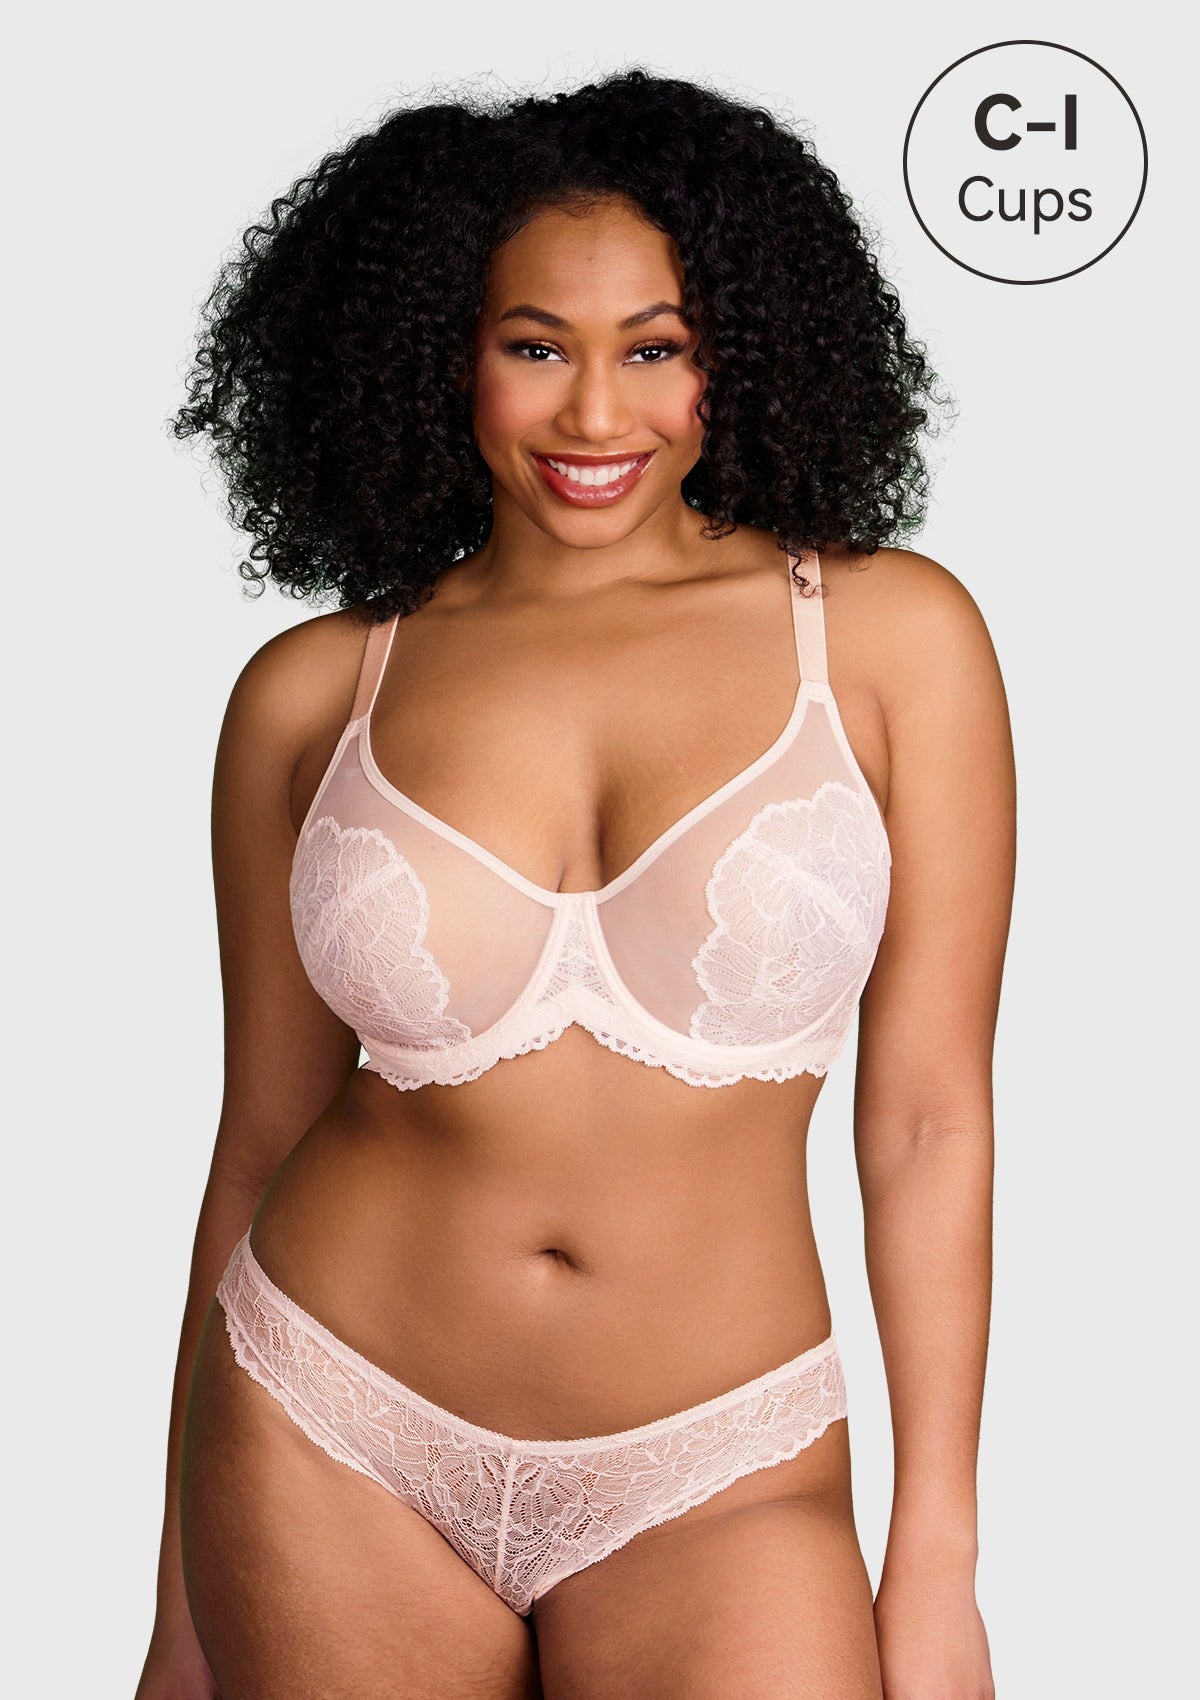 HSIA Blossom Sheer Lace Bra: Comfortable Underwire Bra For Big Busts - White / 44 / H